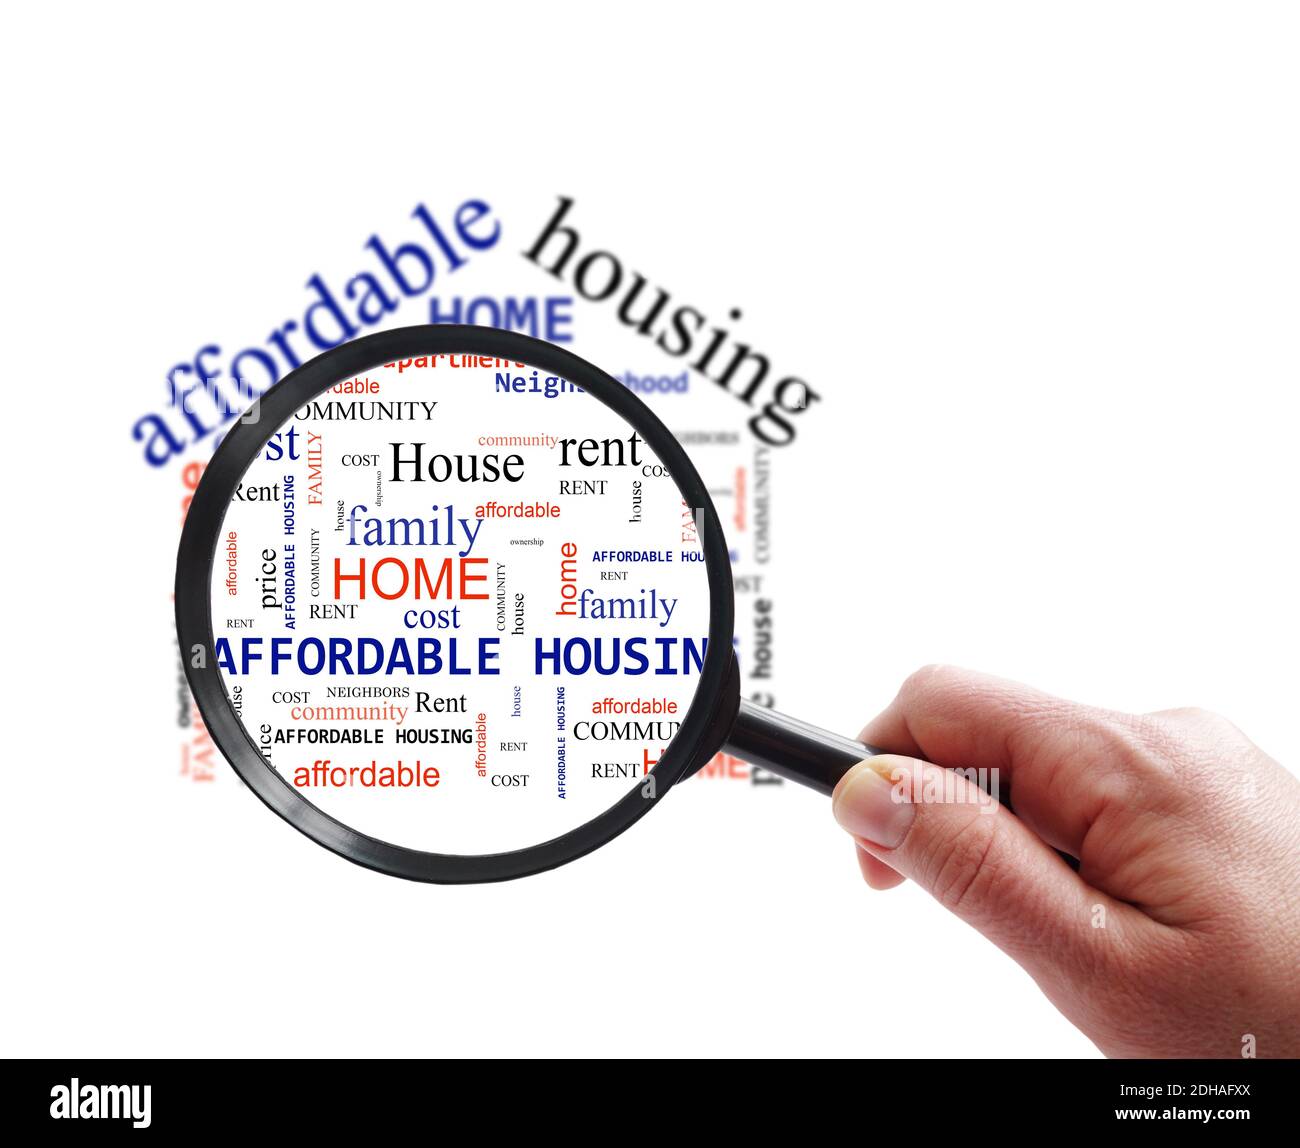 Affordable Housing search Stock Photo